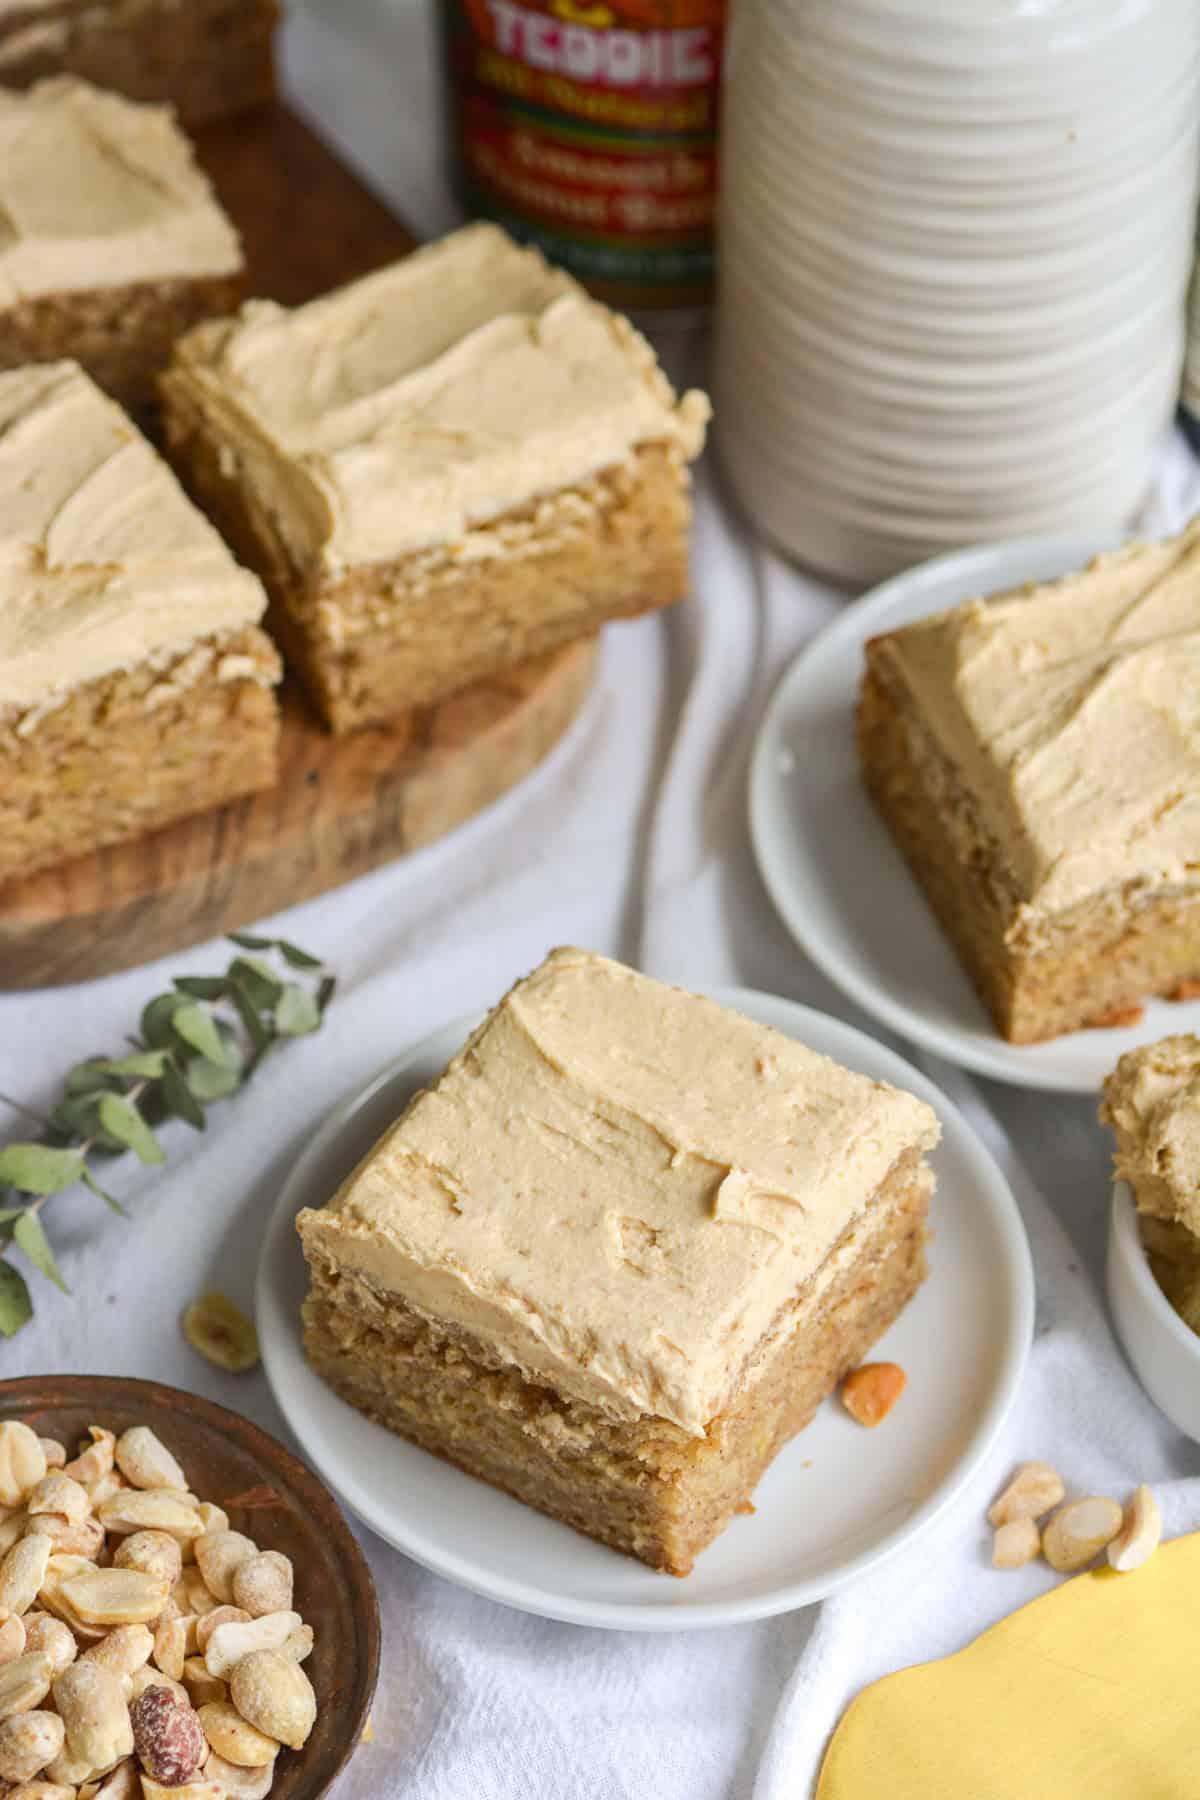 Two slices of Vegan Banana Cake with peanut butter frosting on sall plates and more slices on a small wooden board in the background.